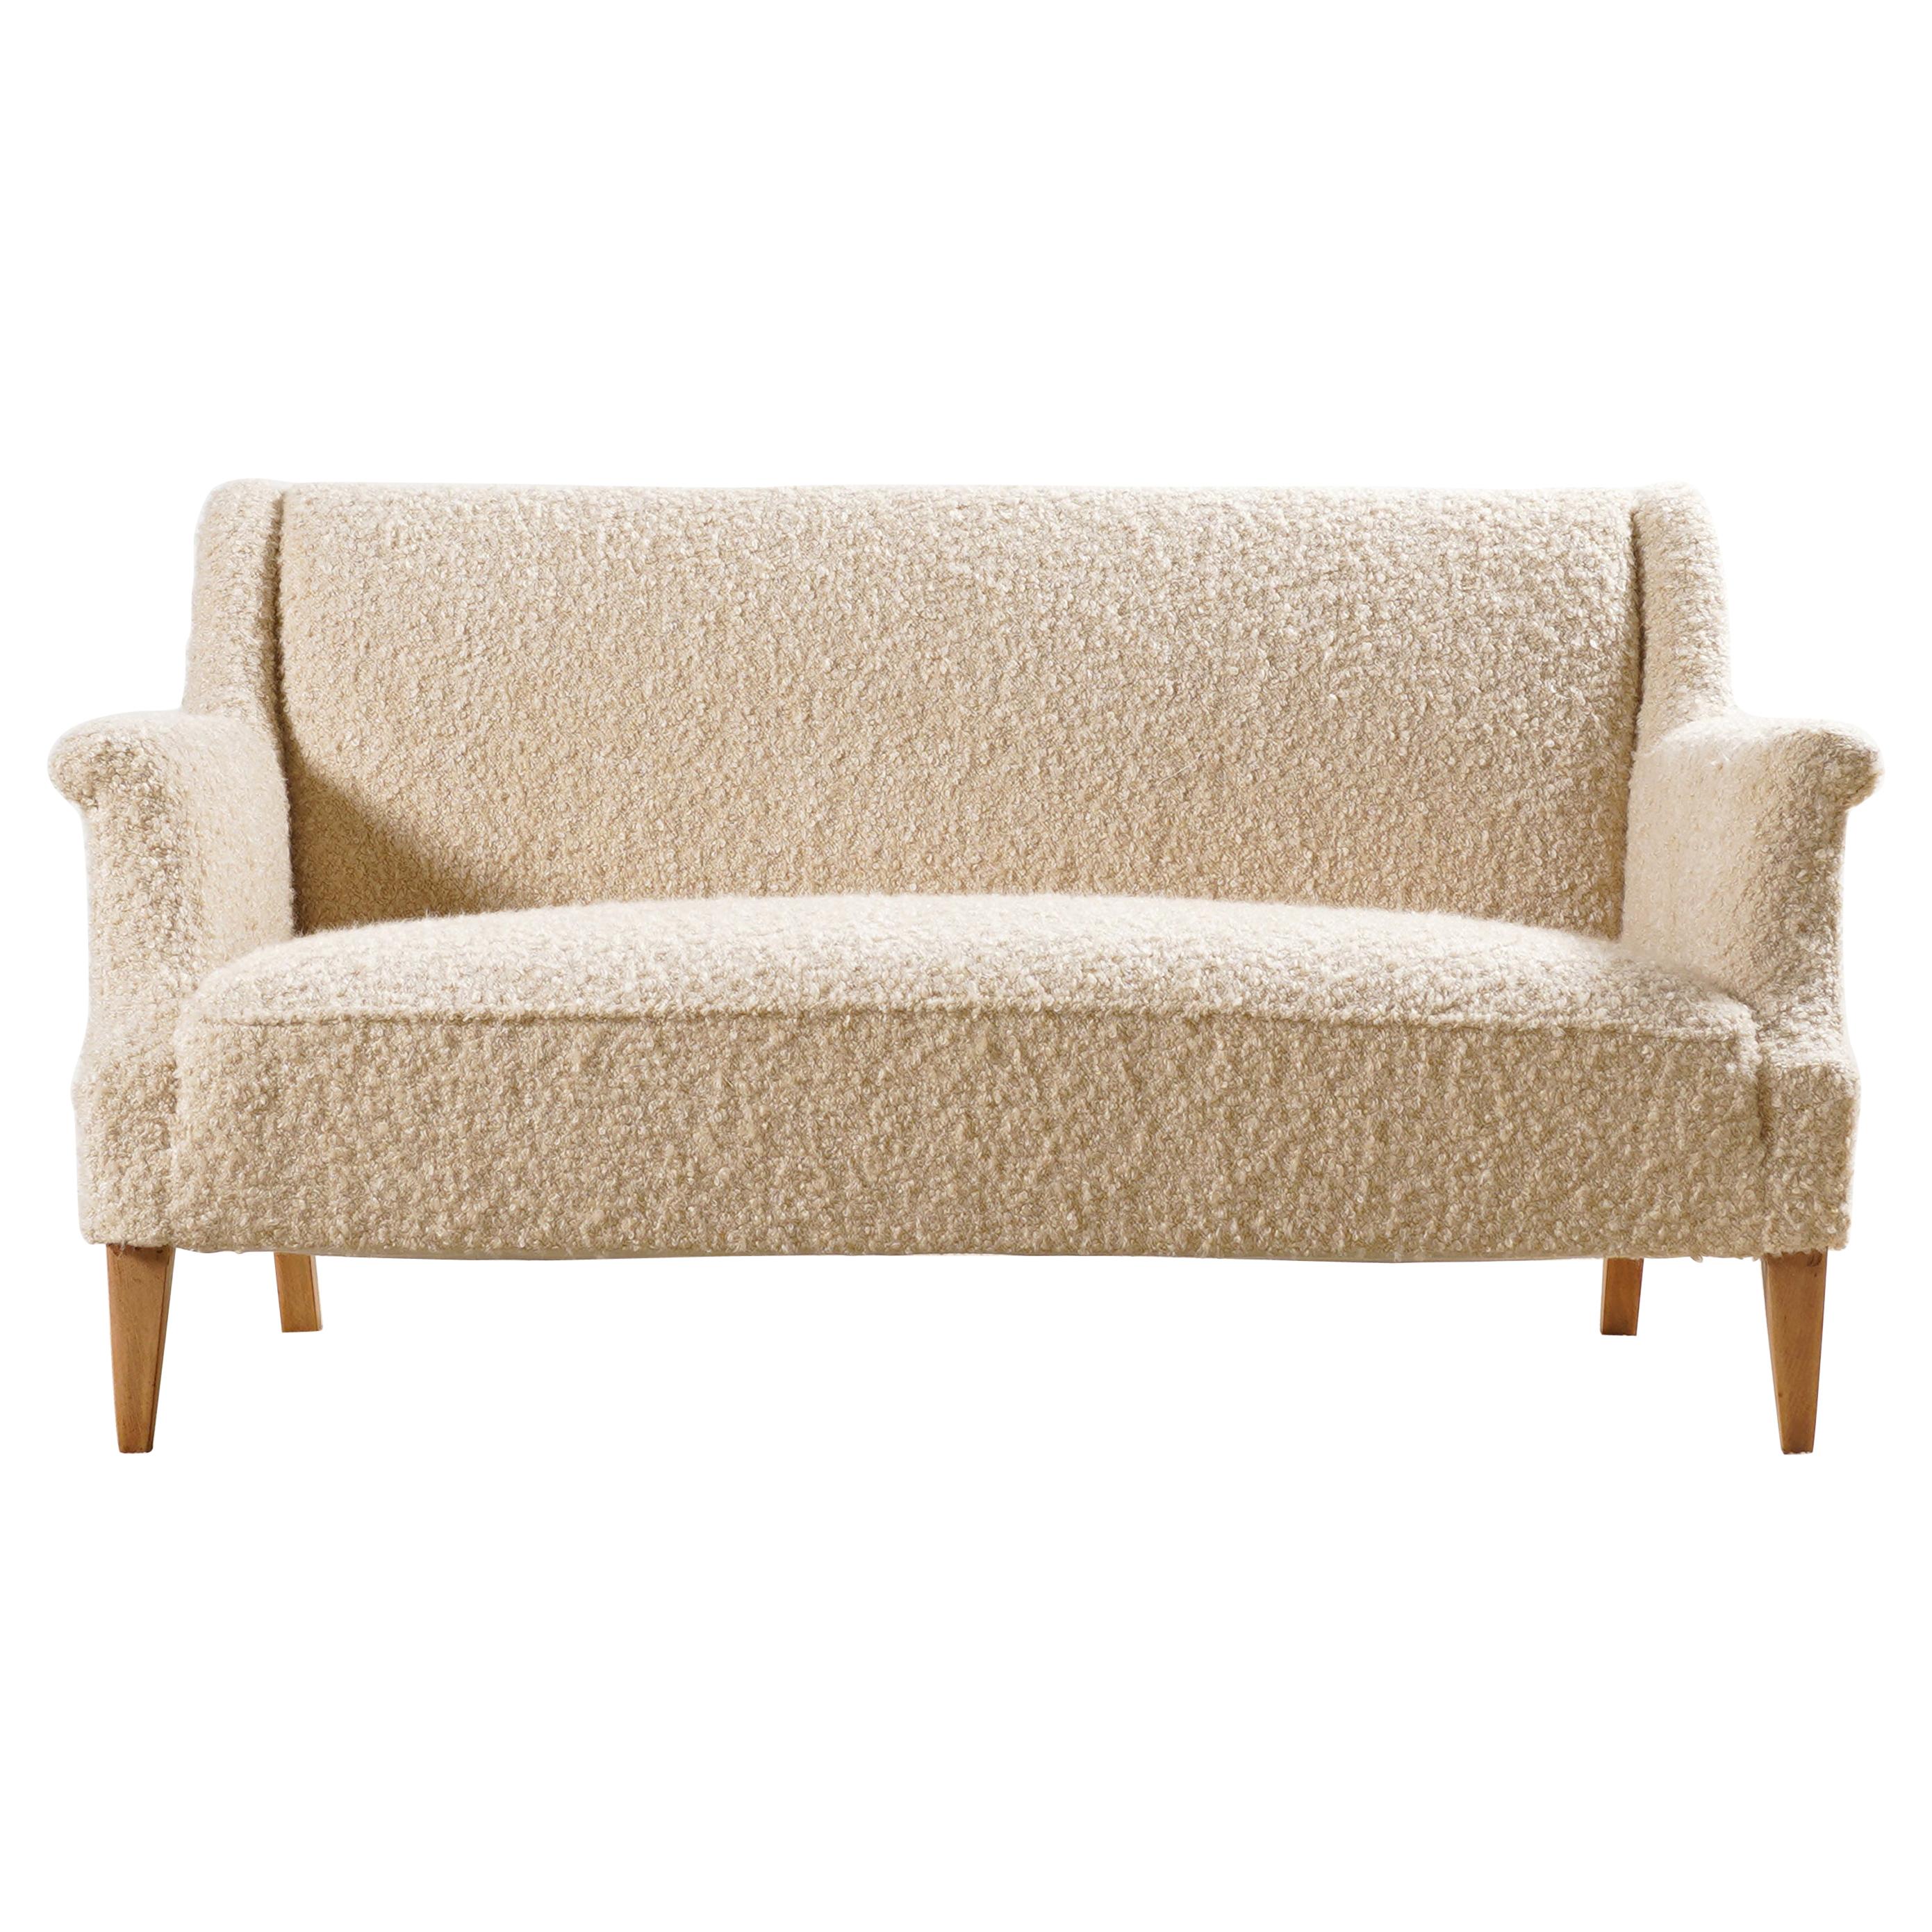 Two-Seat Danish Sofa, Original Piece from the 1940s Newly Upholstered